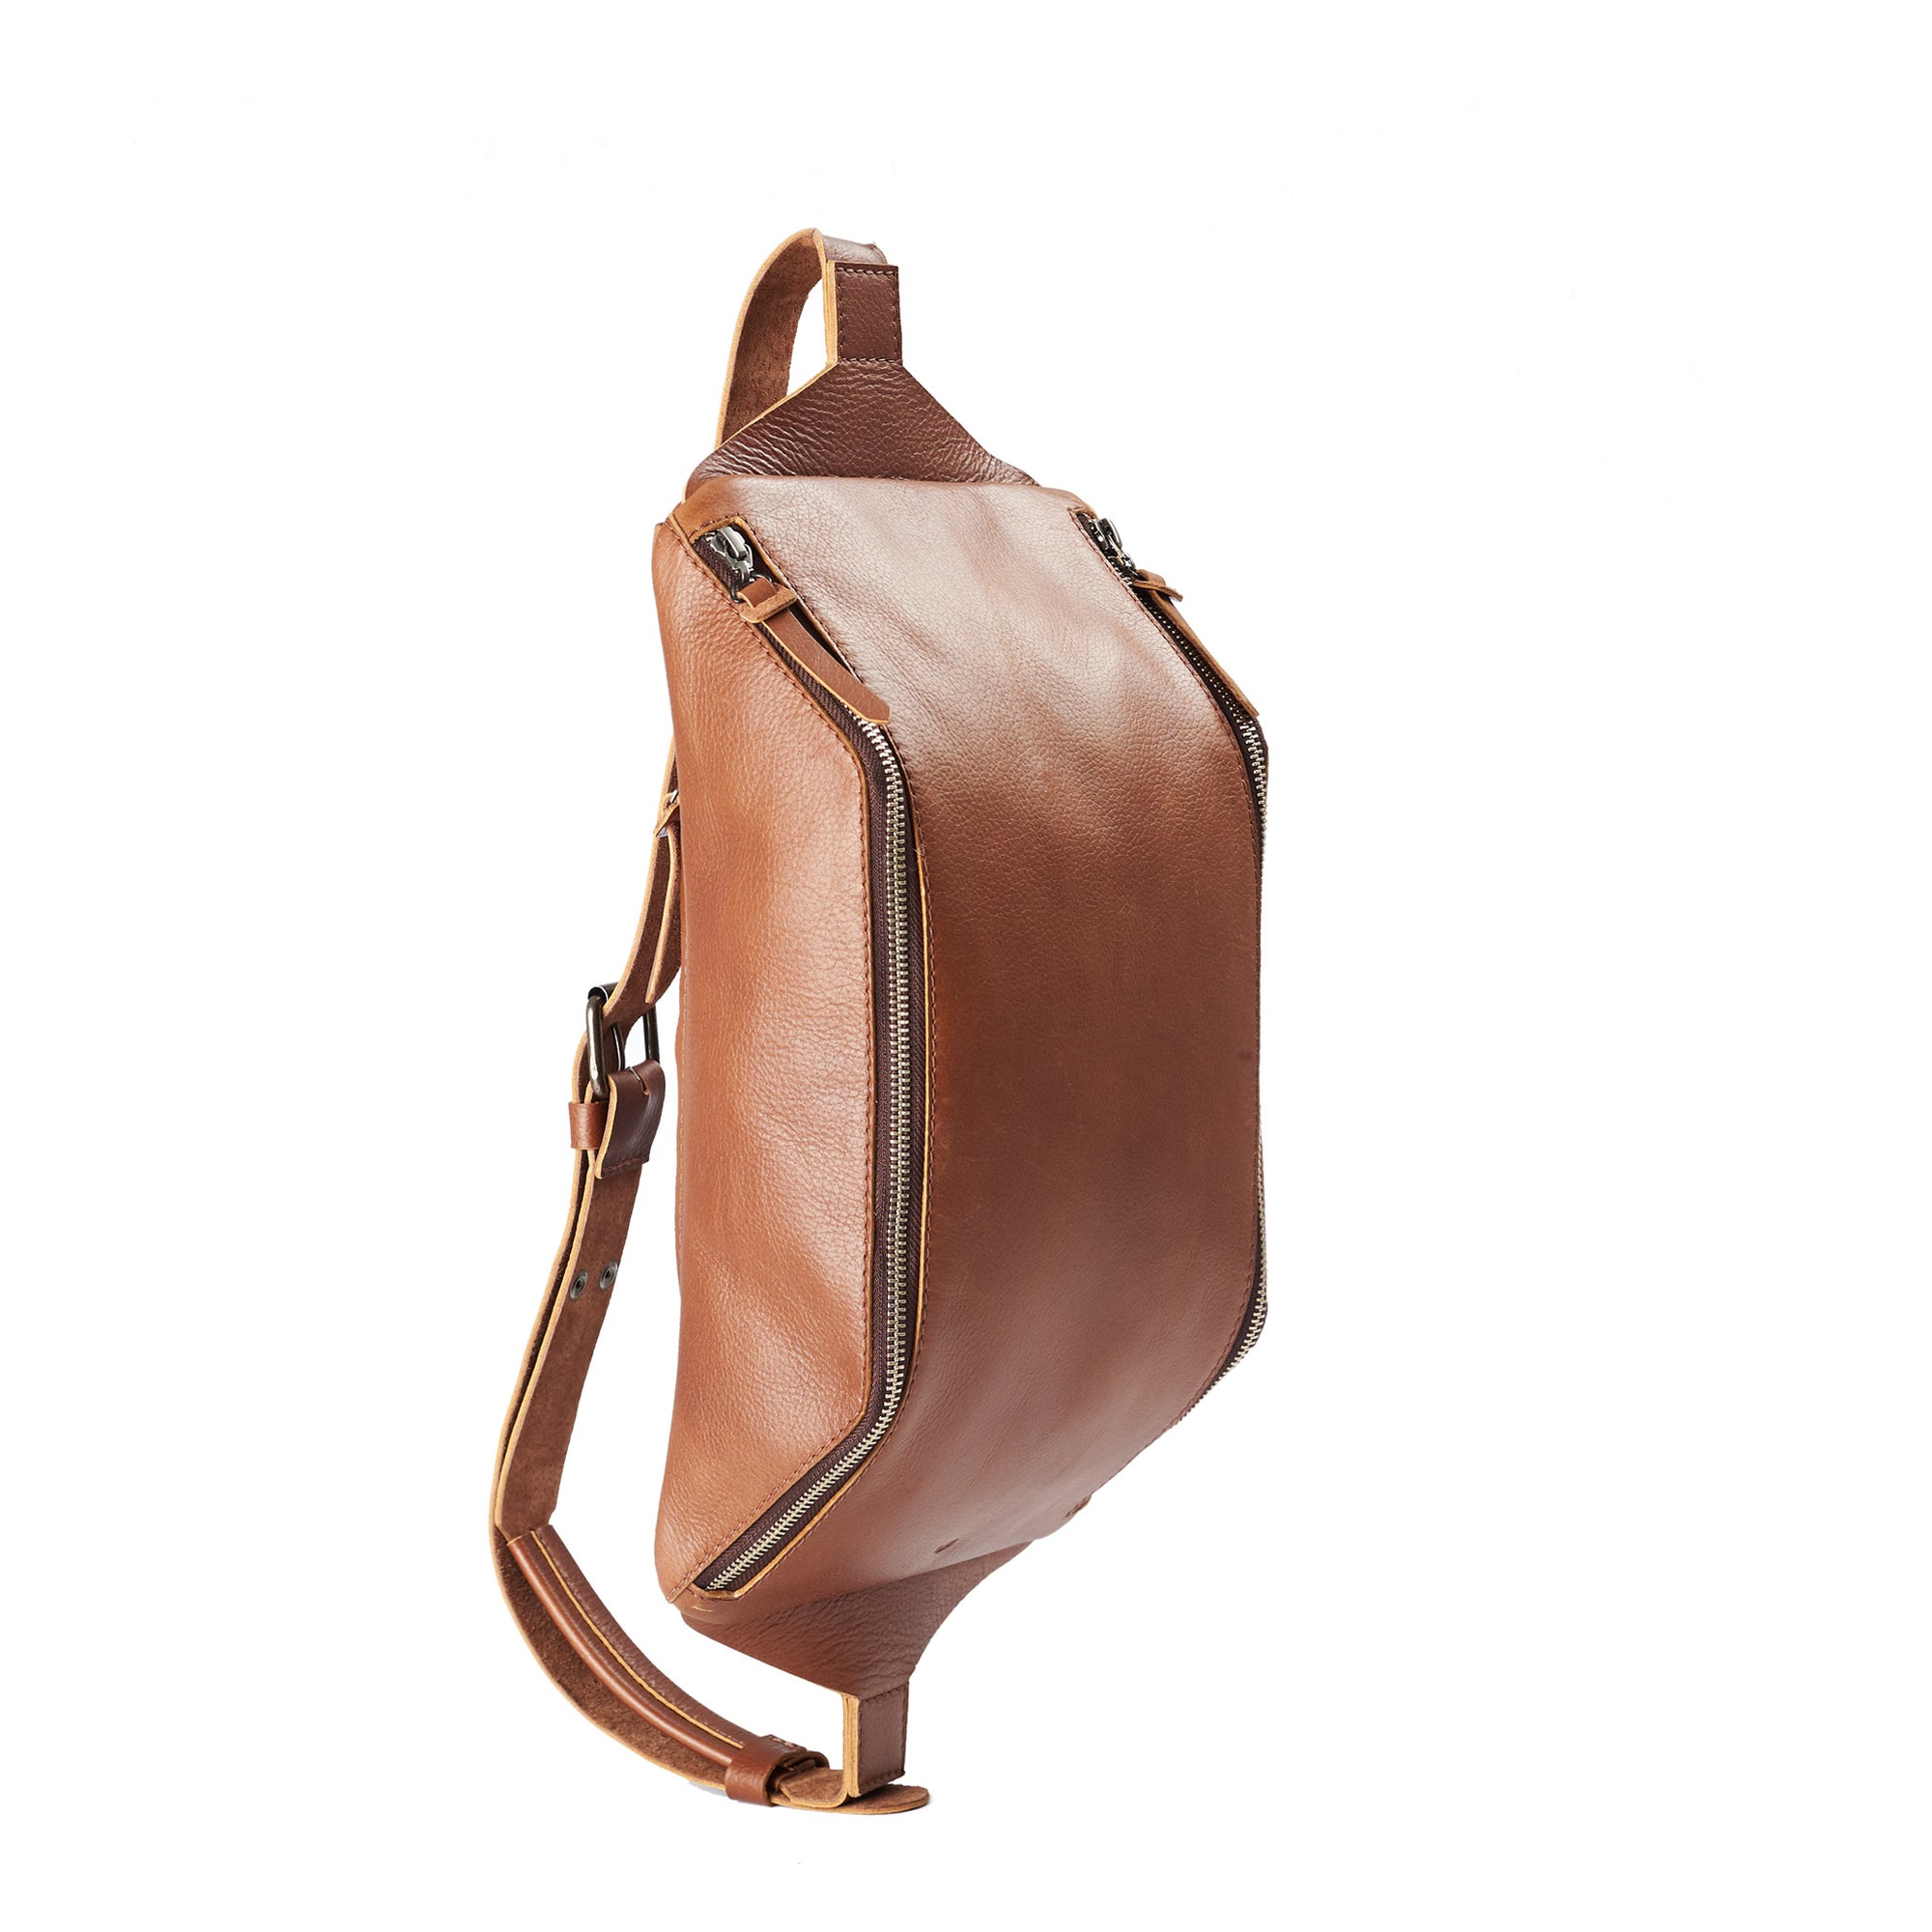 Tan Fenek sling bag backpack made by Capra Leather. Styling of over the shoulder bag in use. 